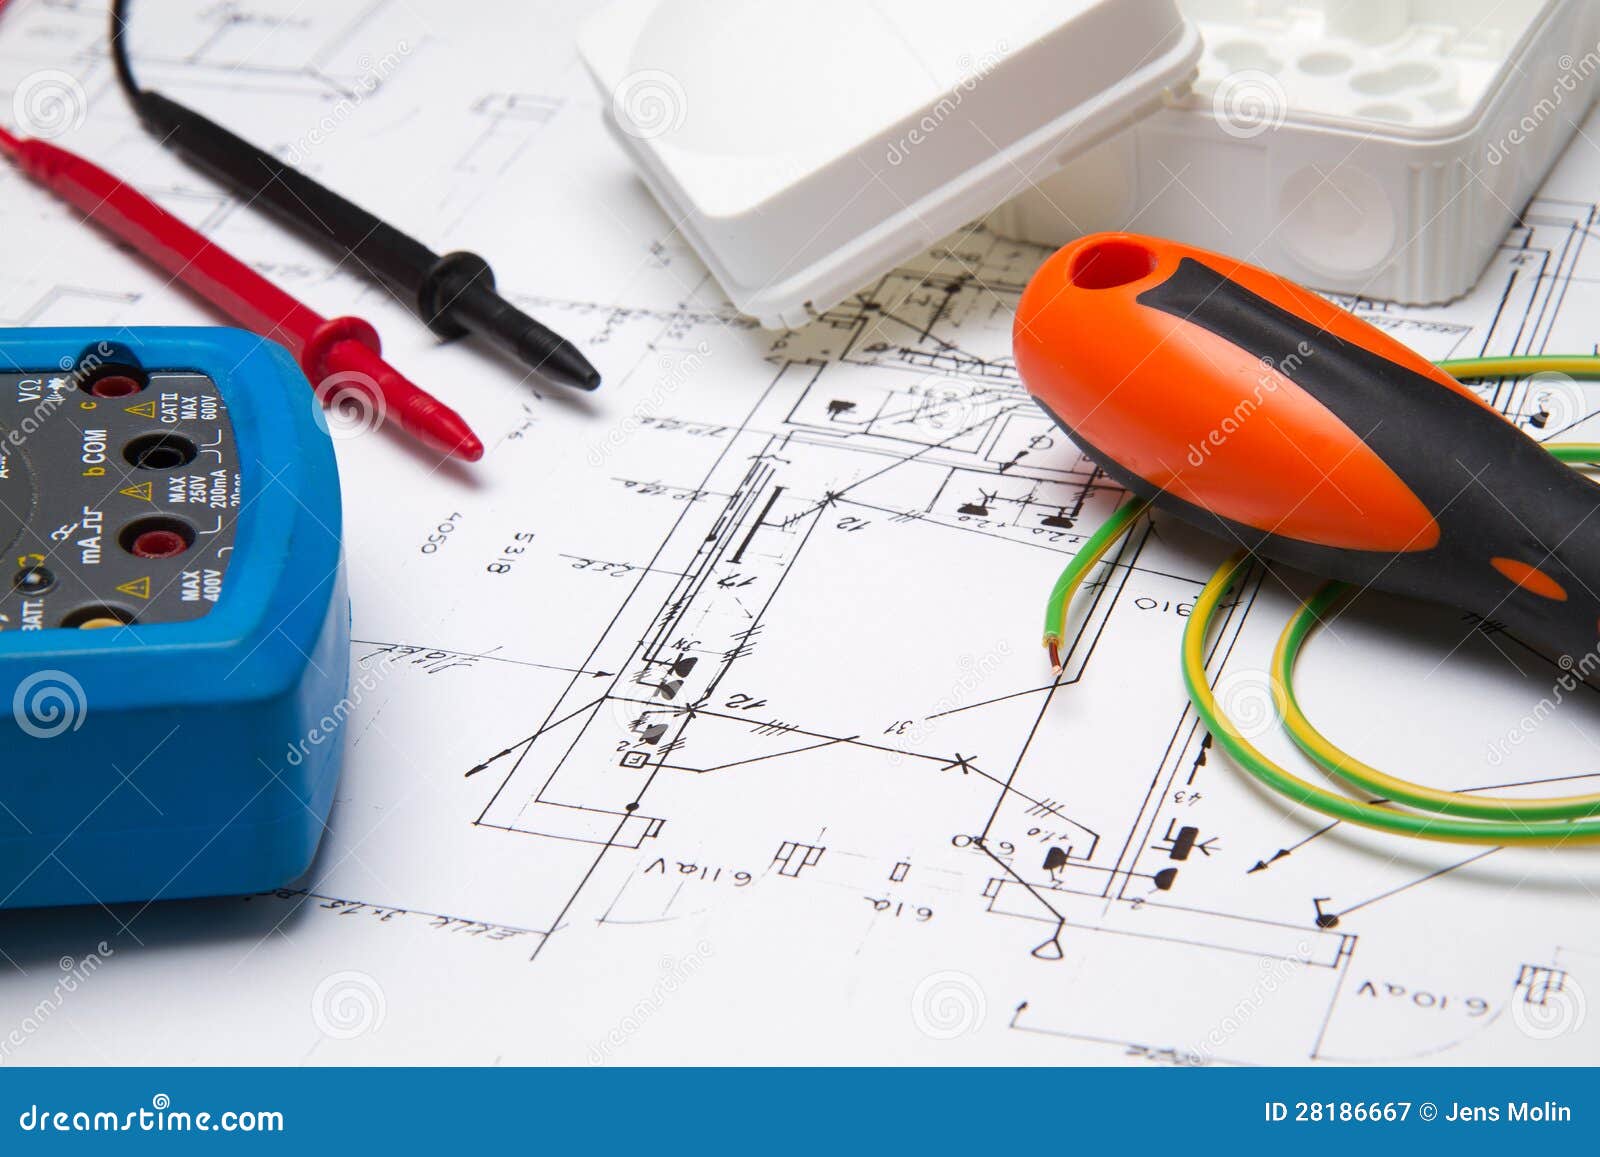 Electrical Instruments On Blueprint Stock Image - Image of equipment ...